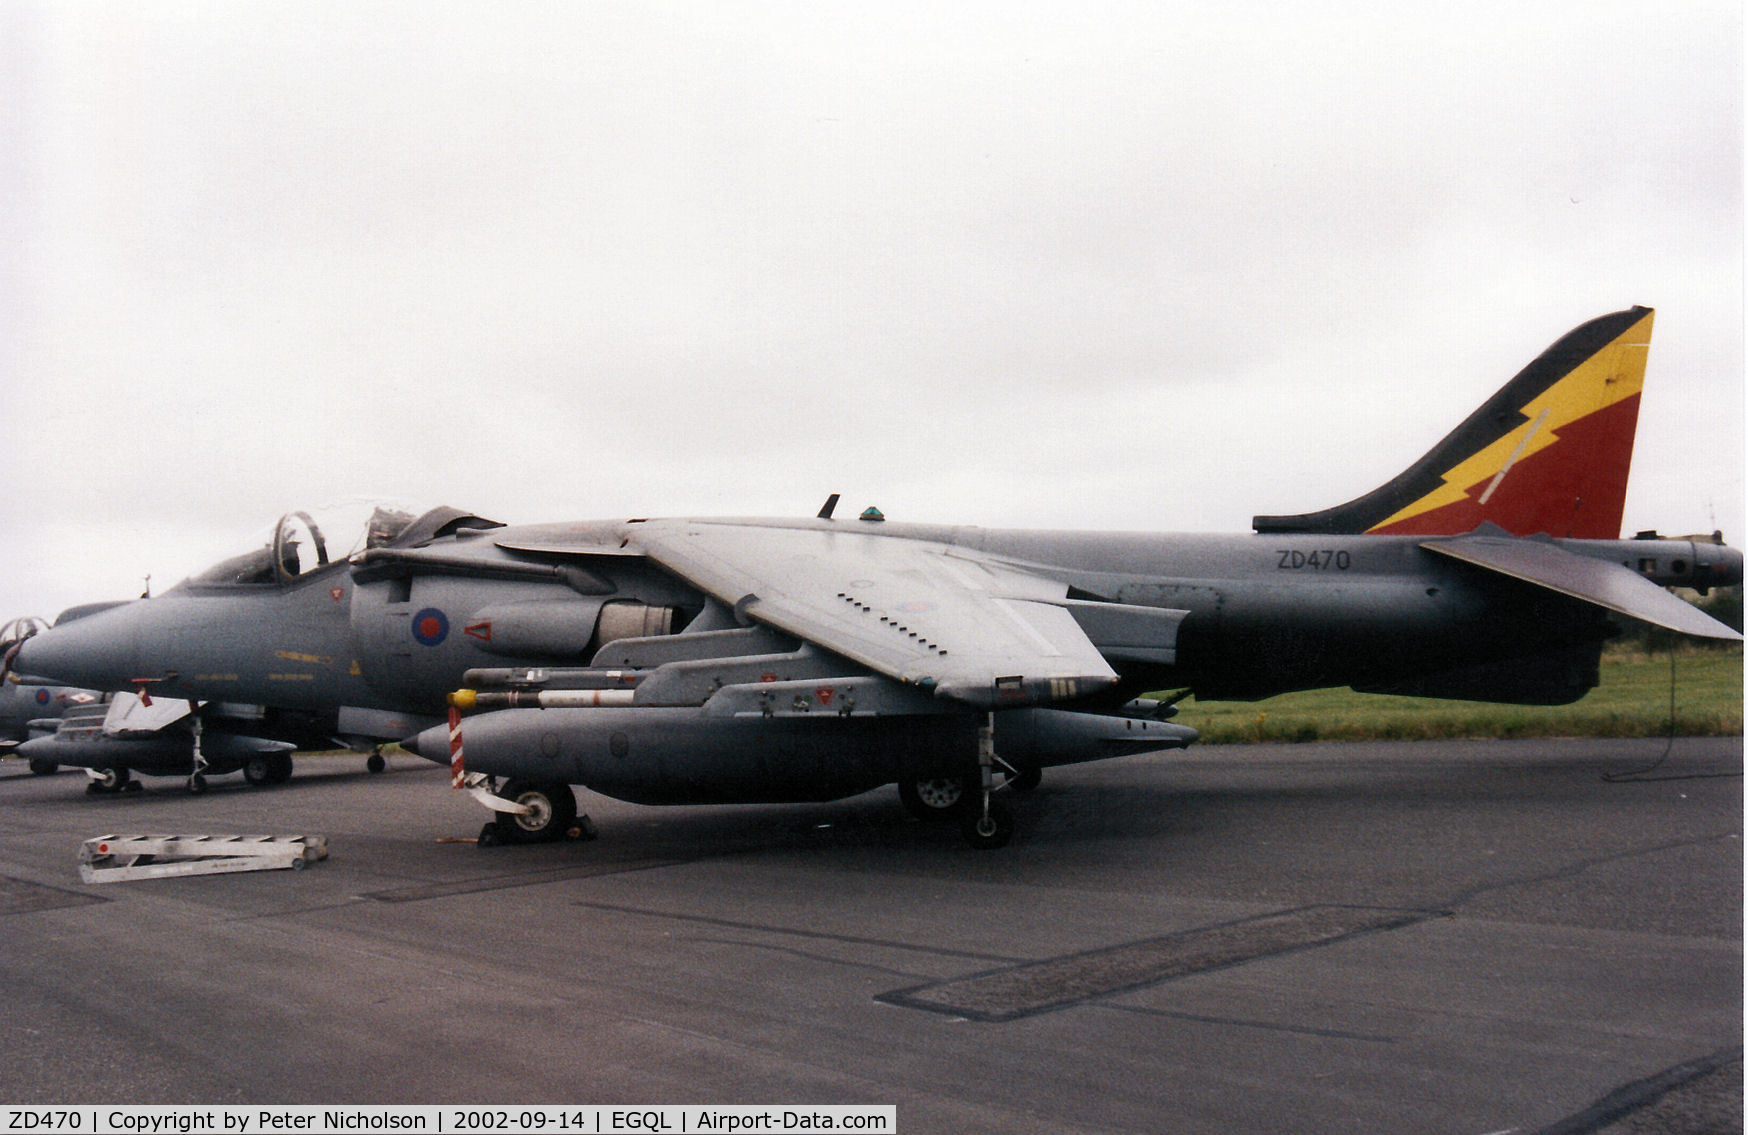 ZD470, 1990 British Aerospace Harrier GR.7 C/N P60, Harrier GR.7, callsign Poison 2, of 4 Squadron on display at the 2002 RAF Leuchars Airshow.